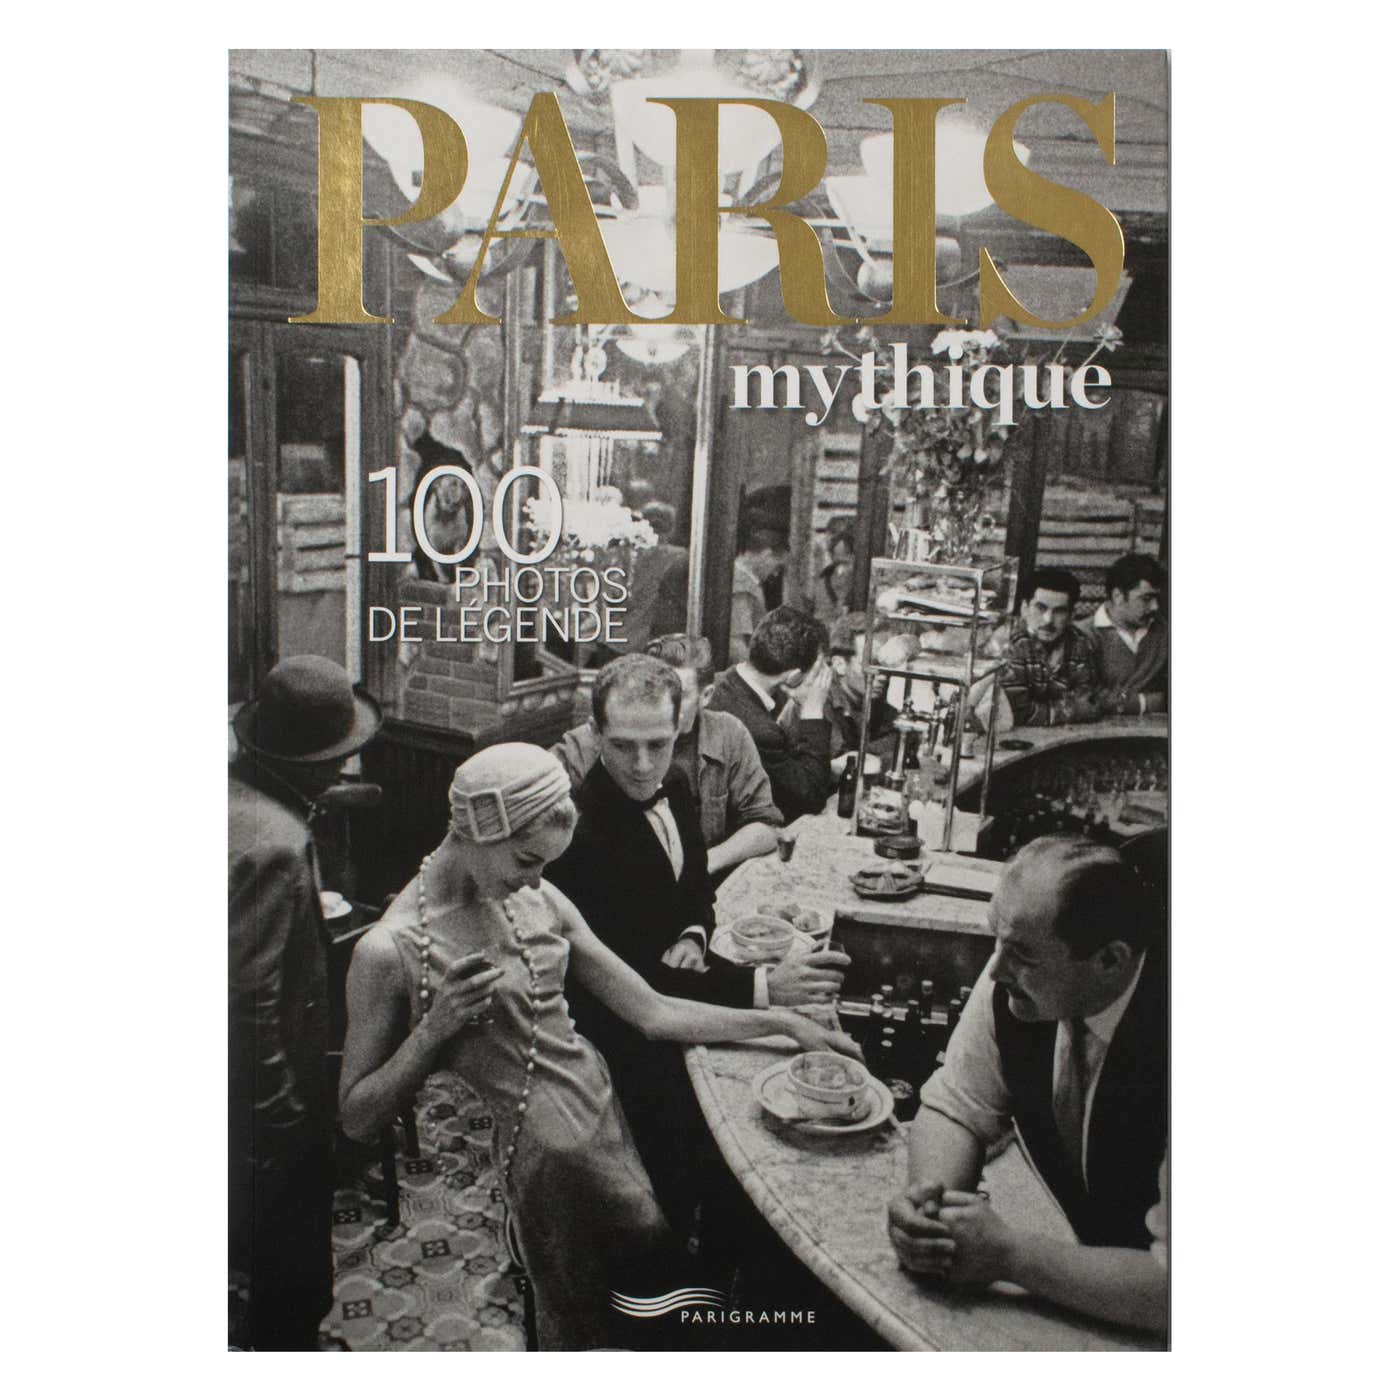 Paris Mythique, Mythical Paris, French-English Book by Parigramme, 2013 ...